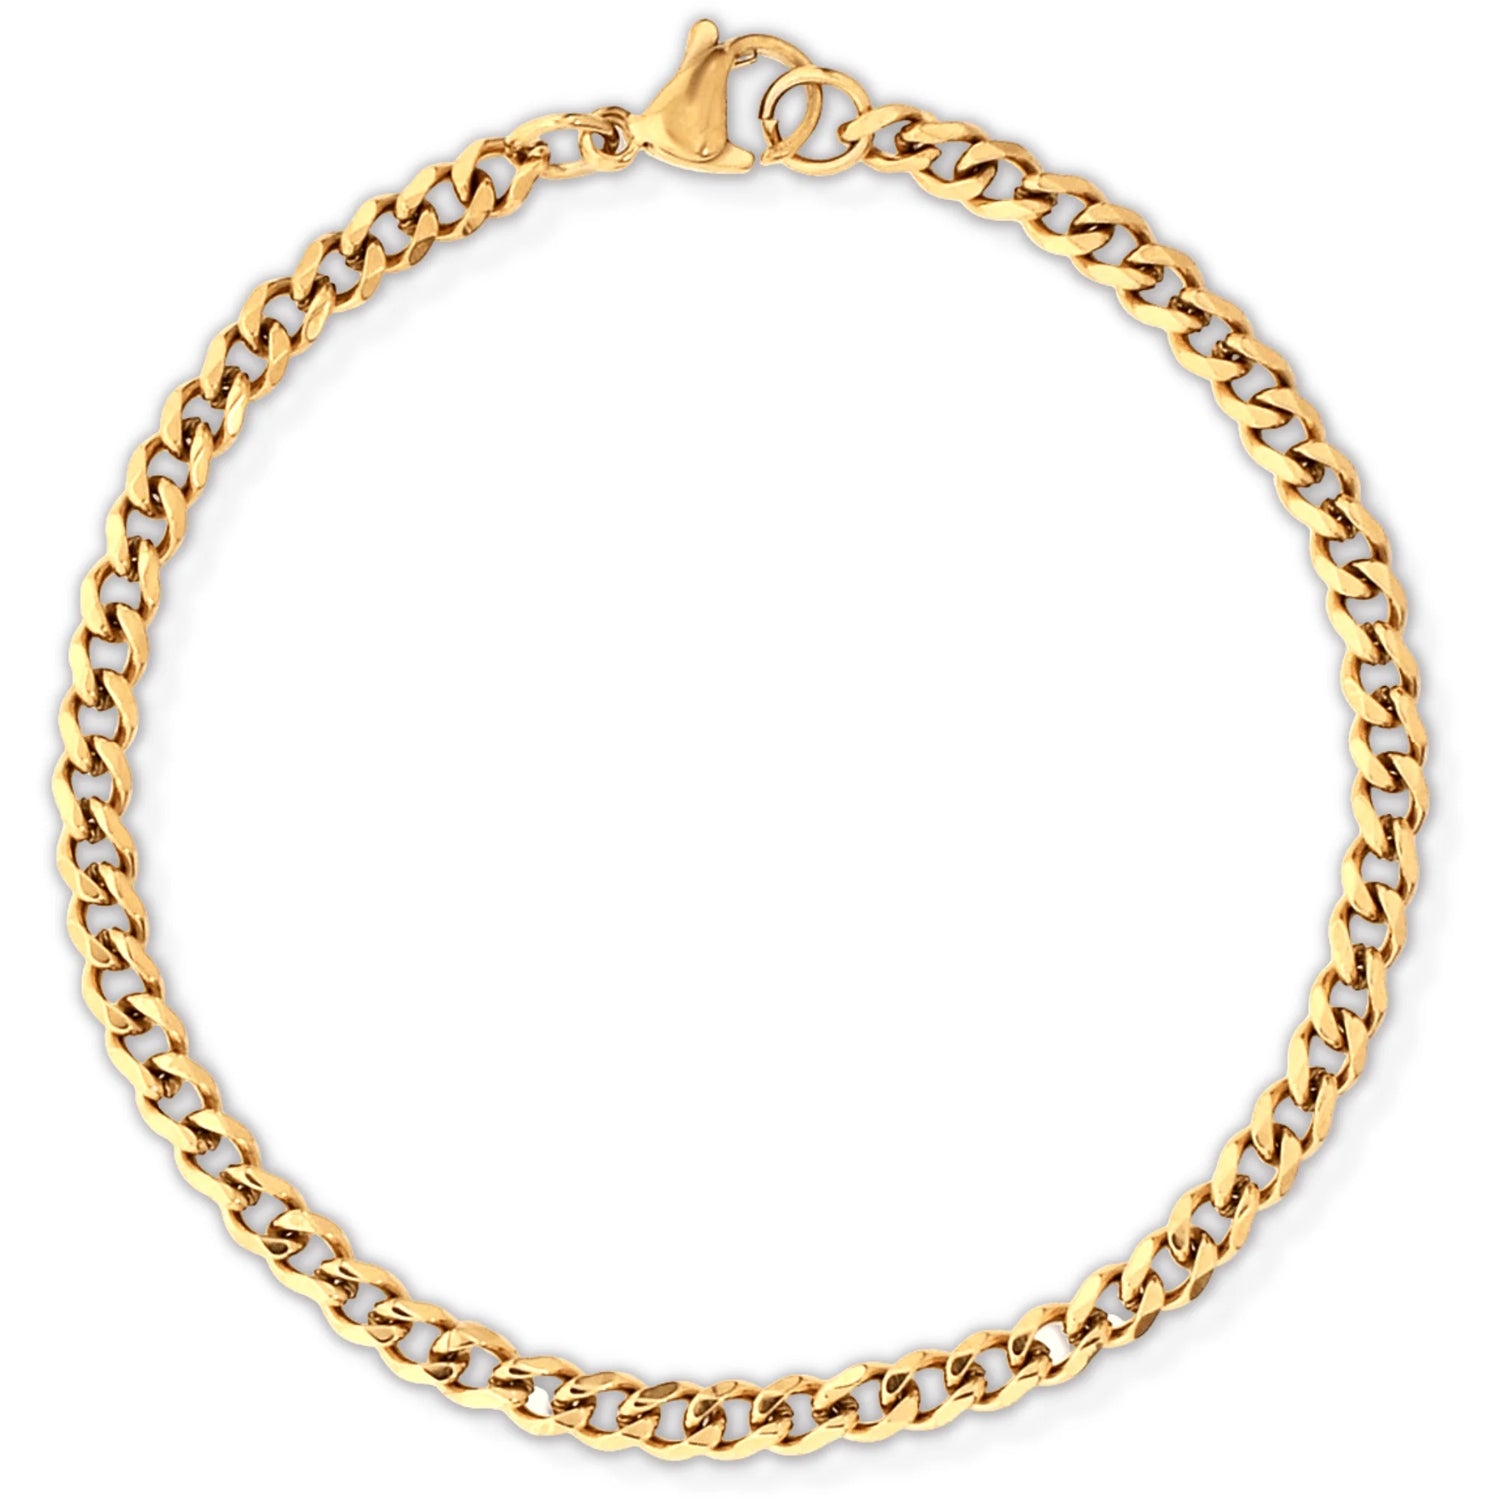 cuban chain gold bracelet with lobster claps closure 